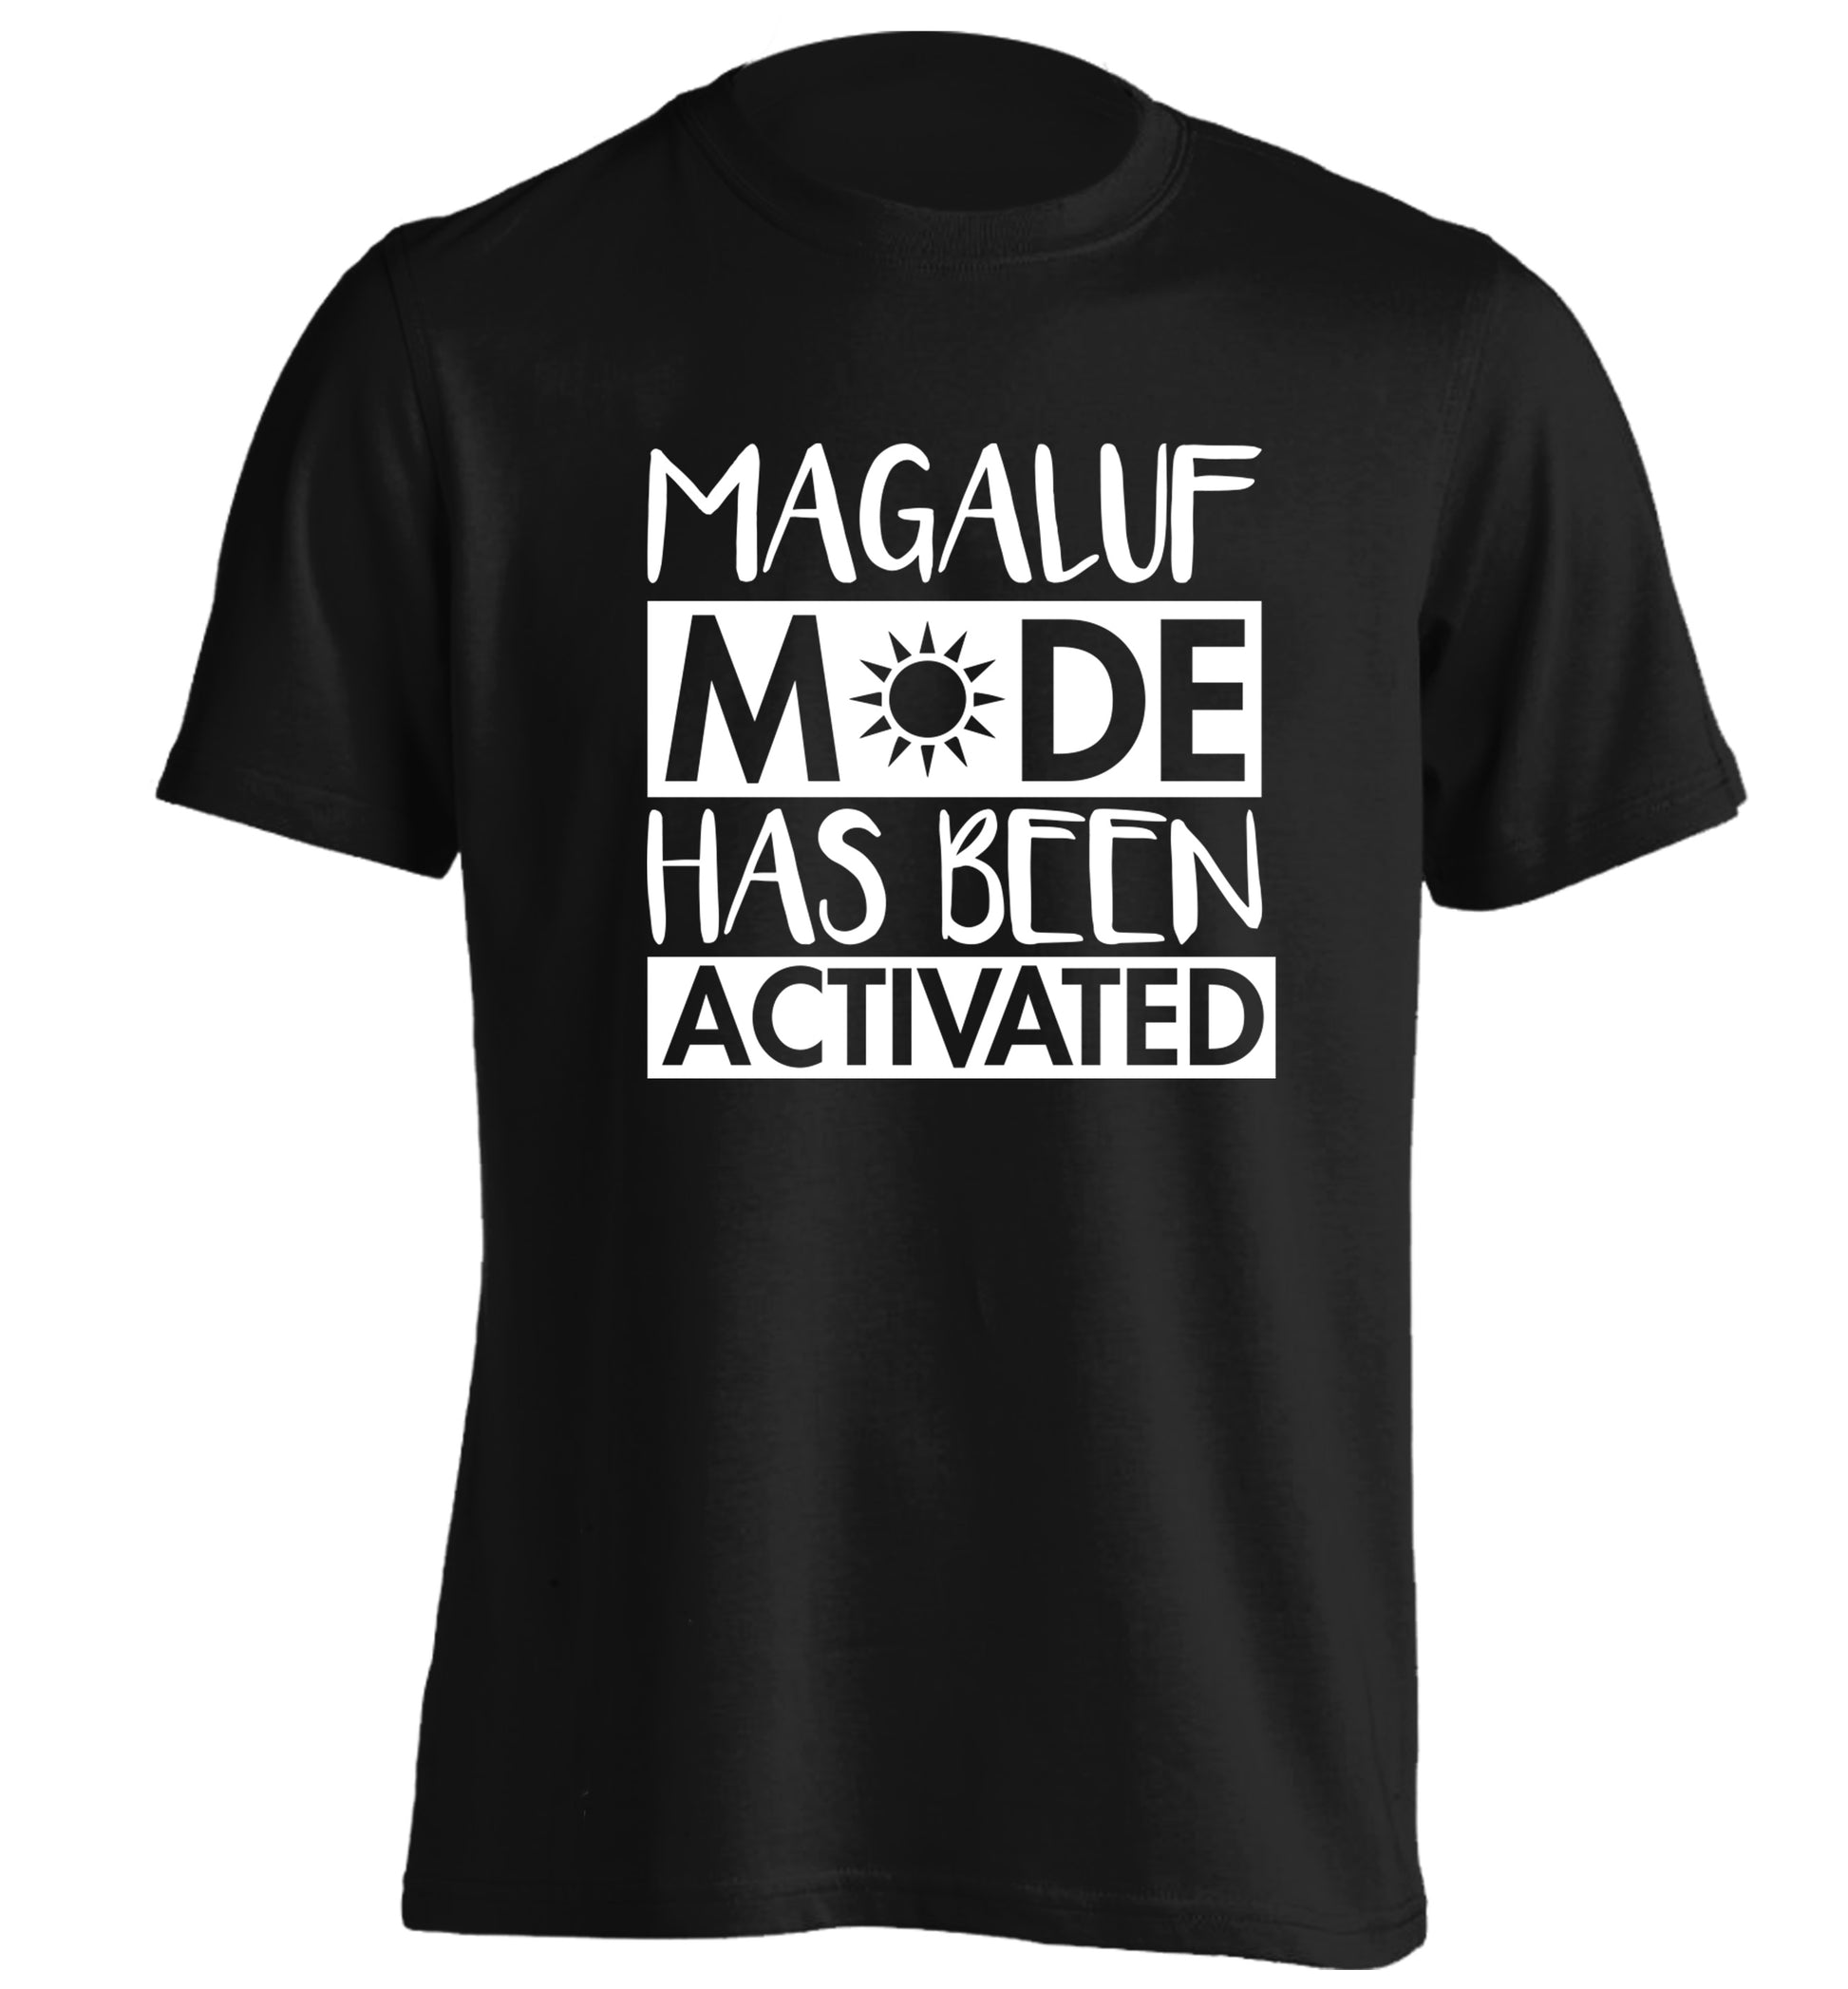 Magaluf mode has been activated adults unisex black Tshirt 2XL